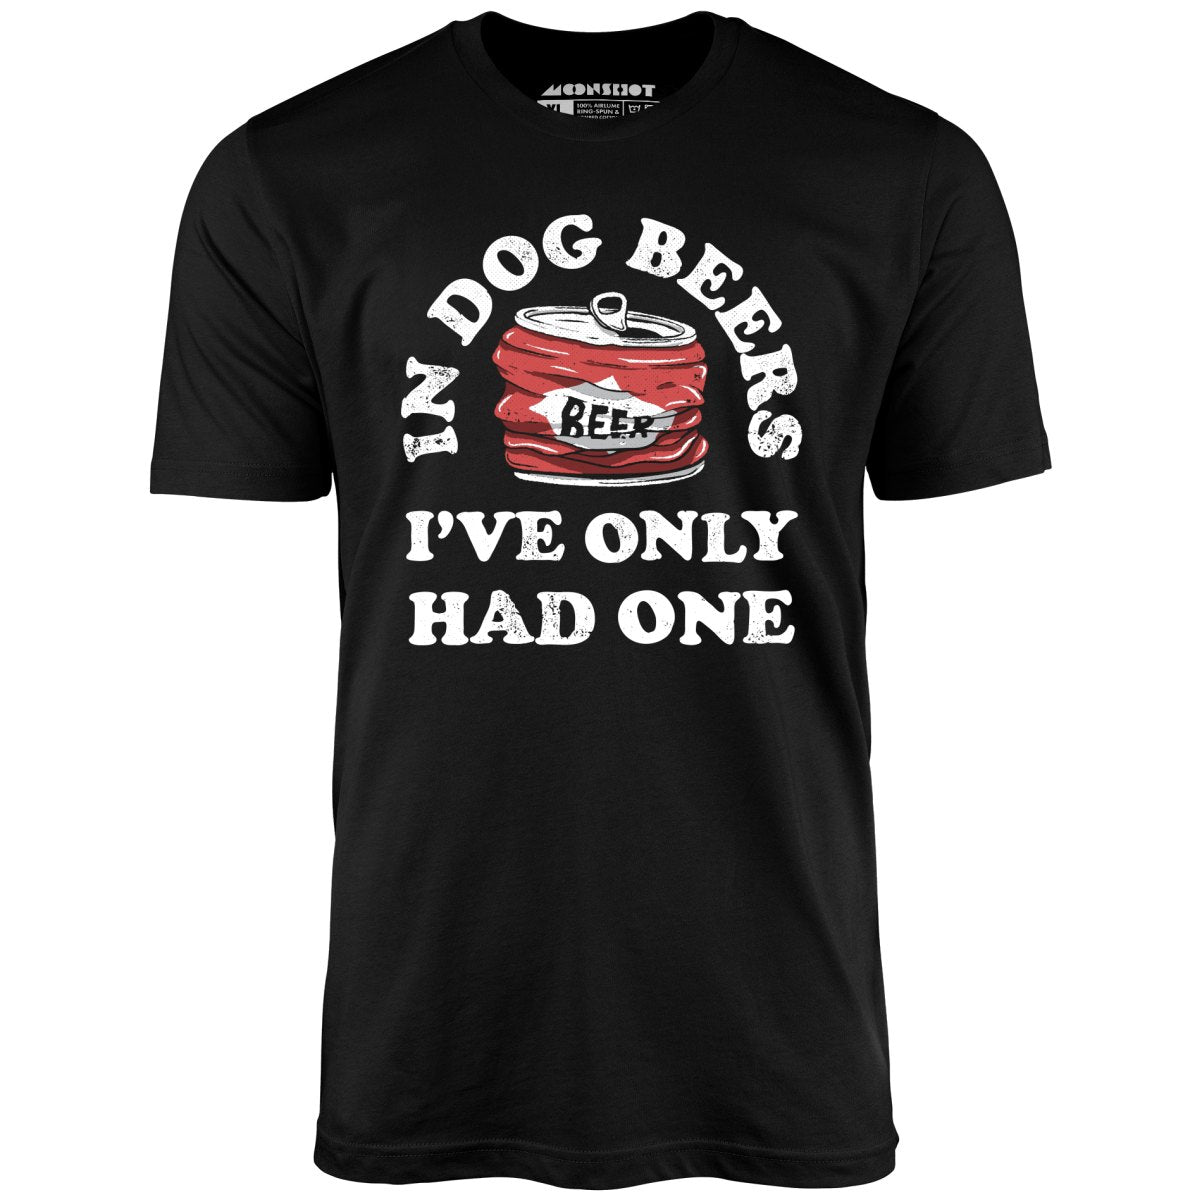 In Dog Beers I've Only Had One - Unisex T-Shirt